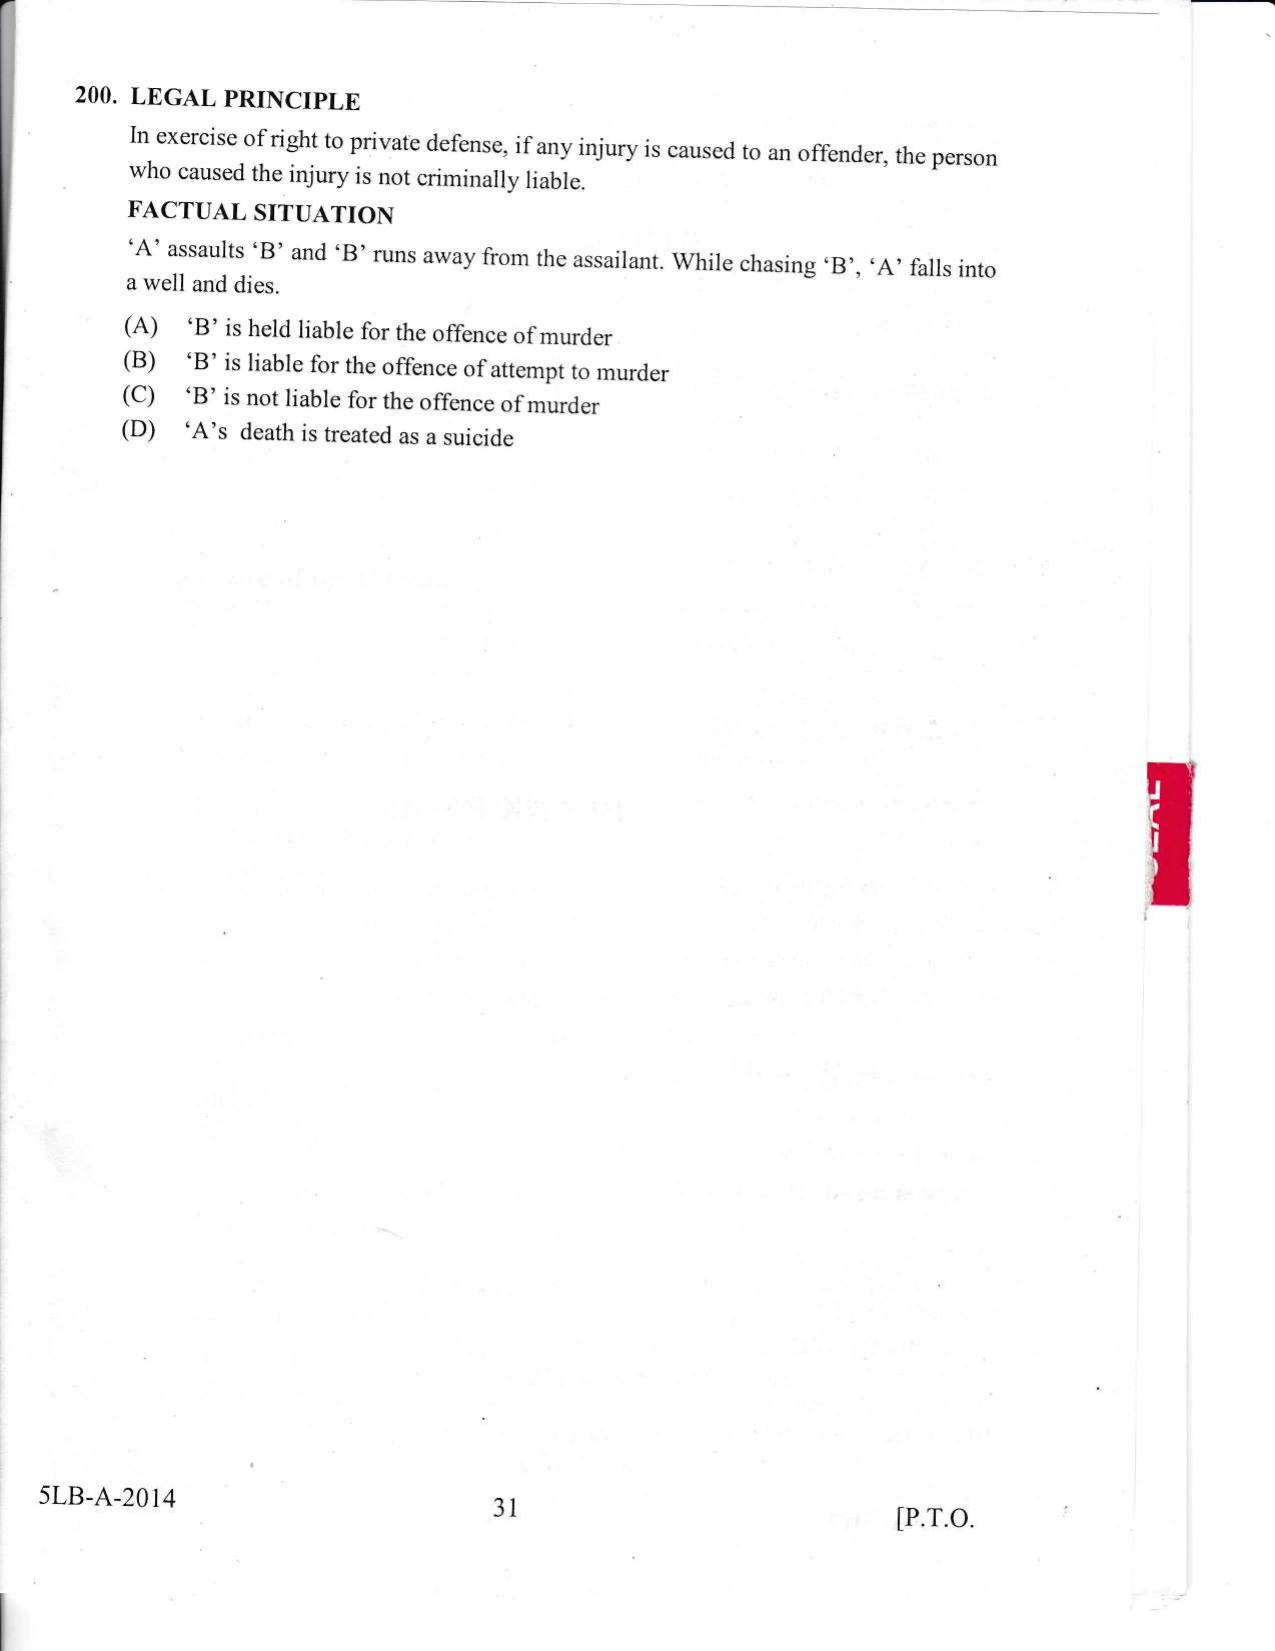 KLEE 5 Year LLB Exam 2014 Question Paper - Page 31